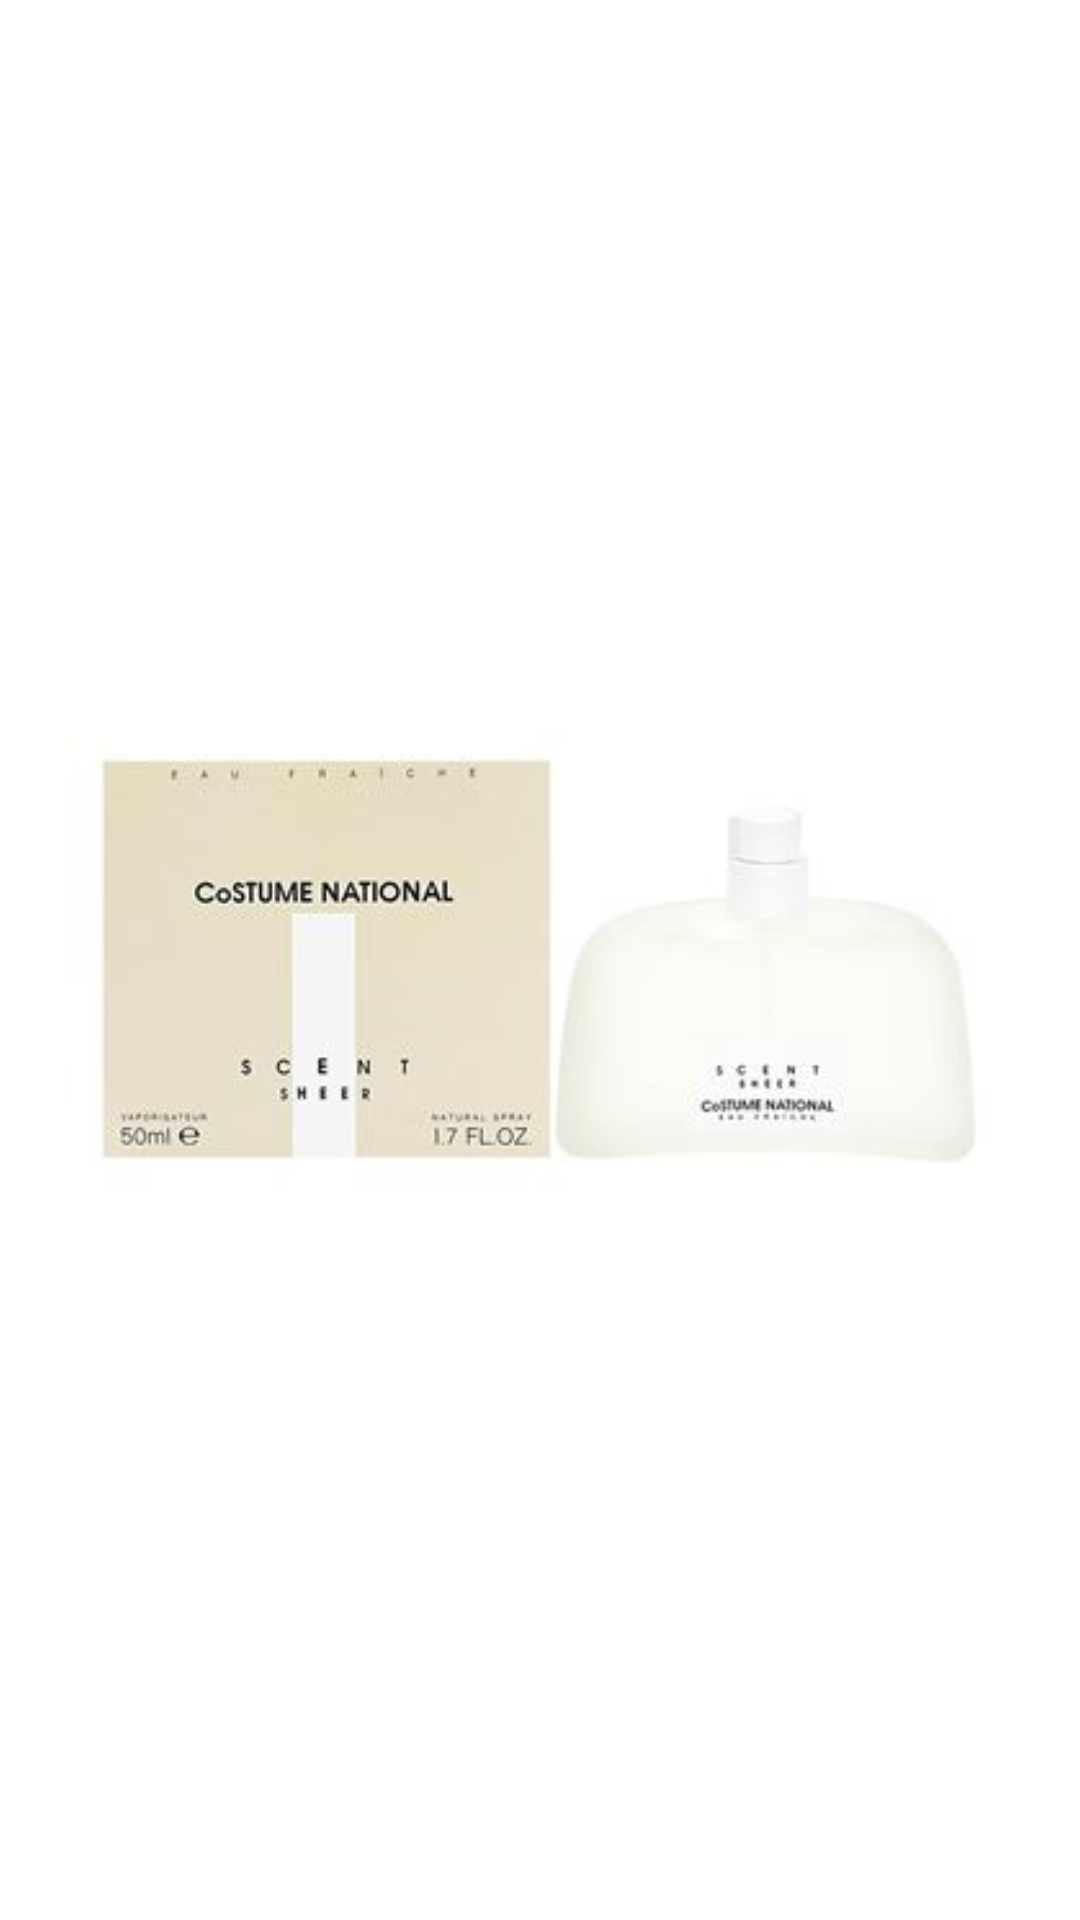 Costume National Scent Sheer 100ml